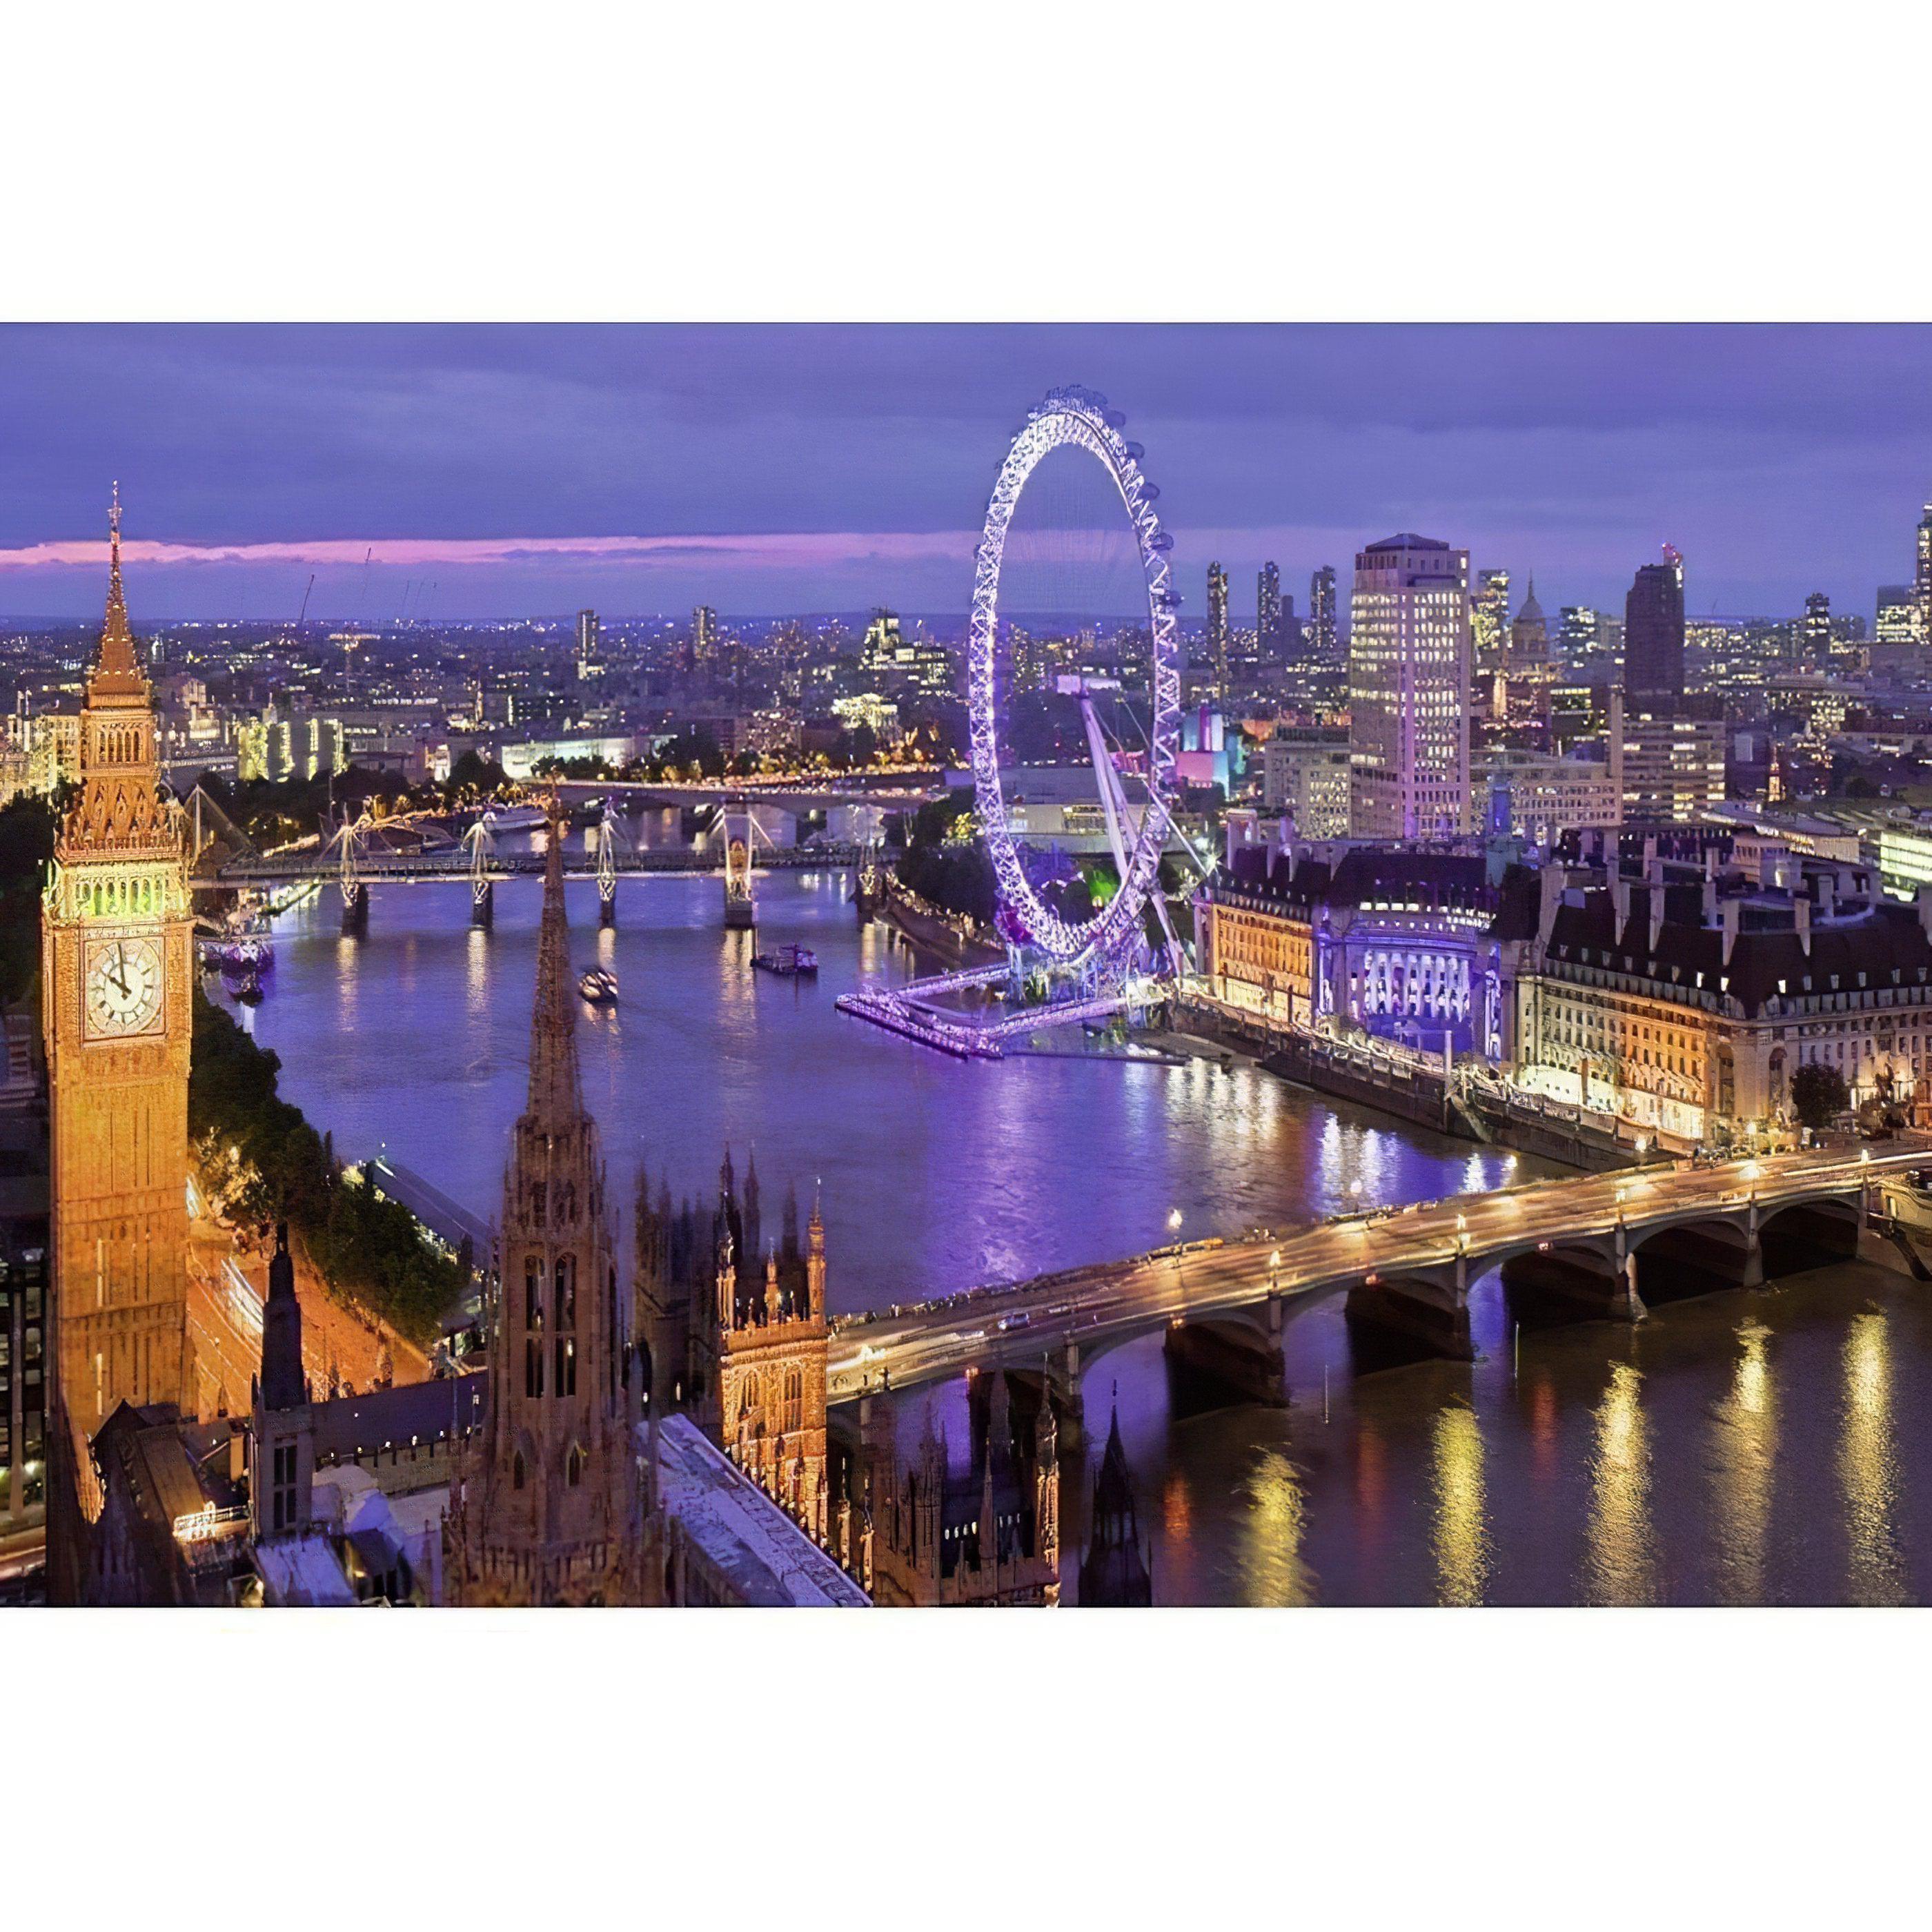 Experience the dazzling lights of London At Night in this artwork.London At Night - Diamondartlove